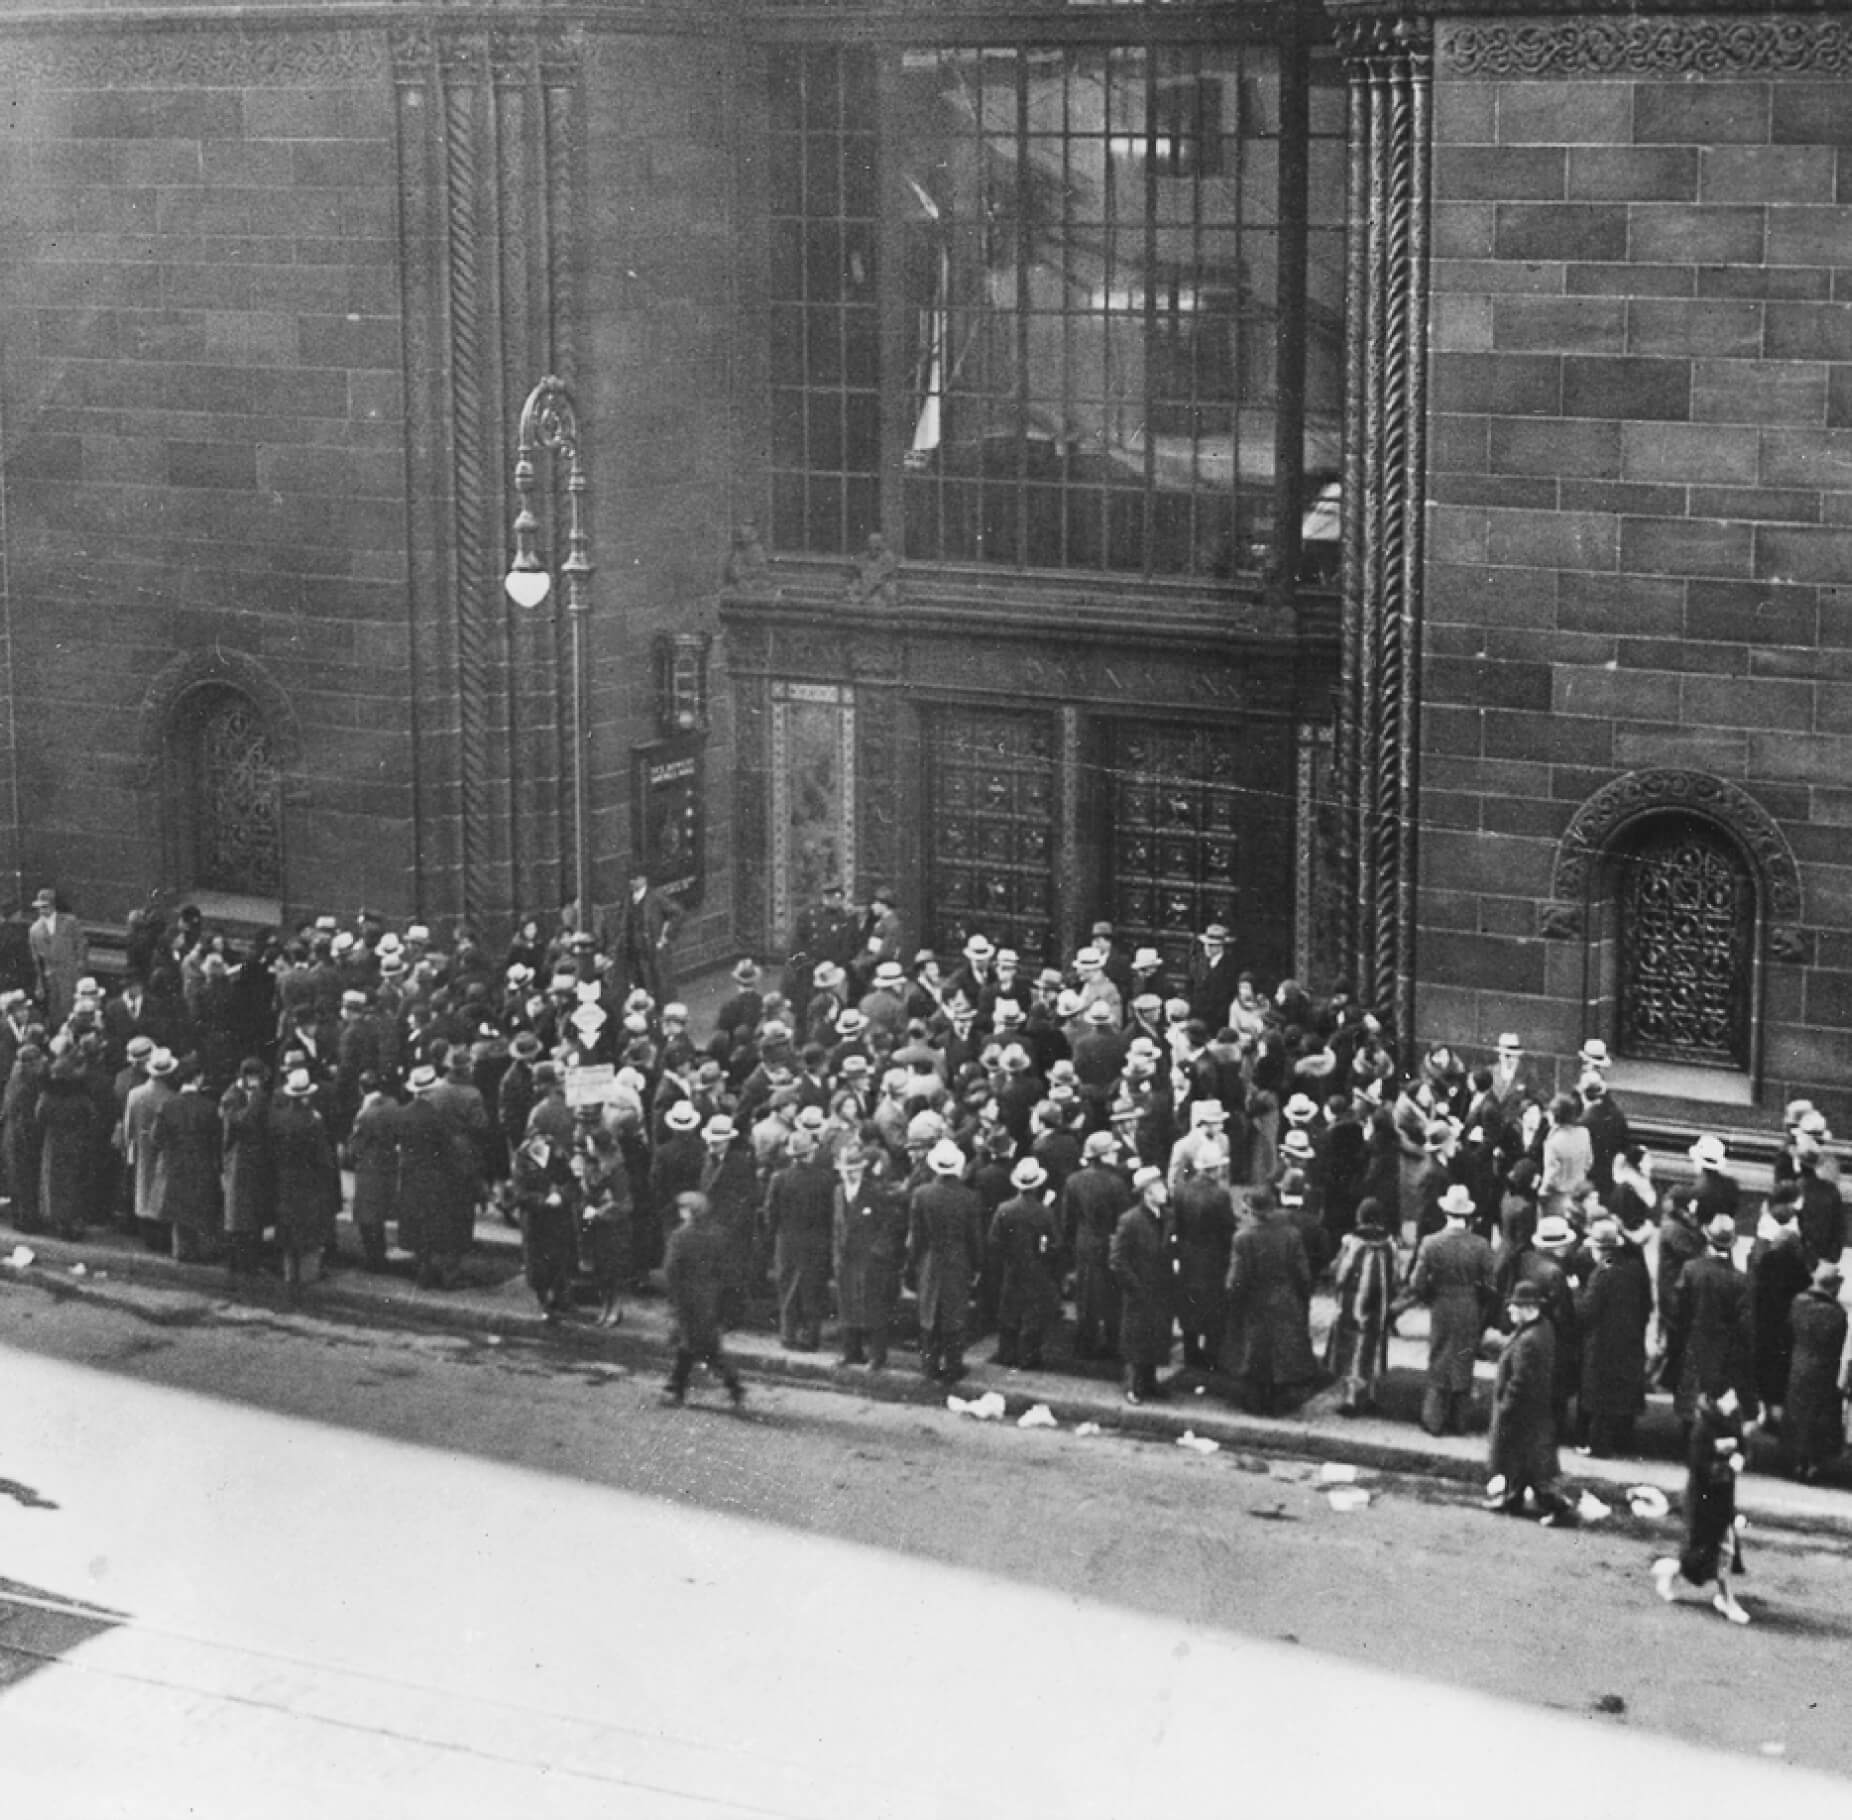 People waiting in line to enter the bank